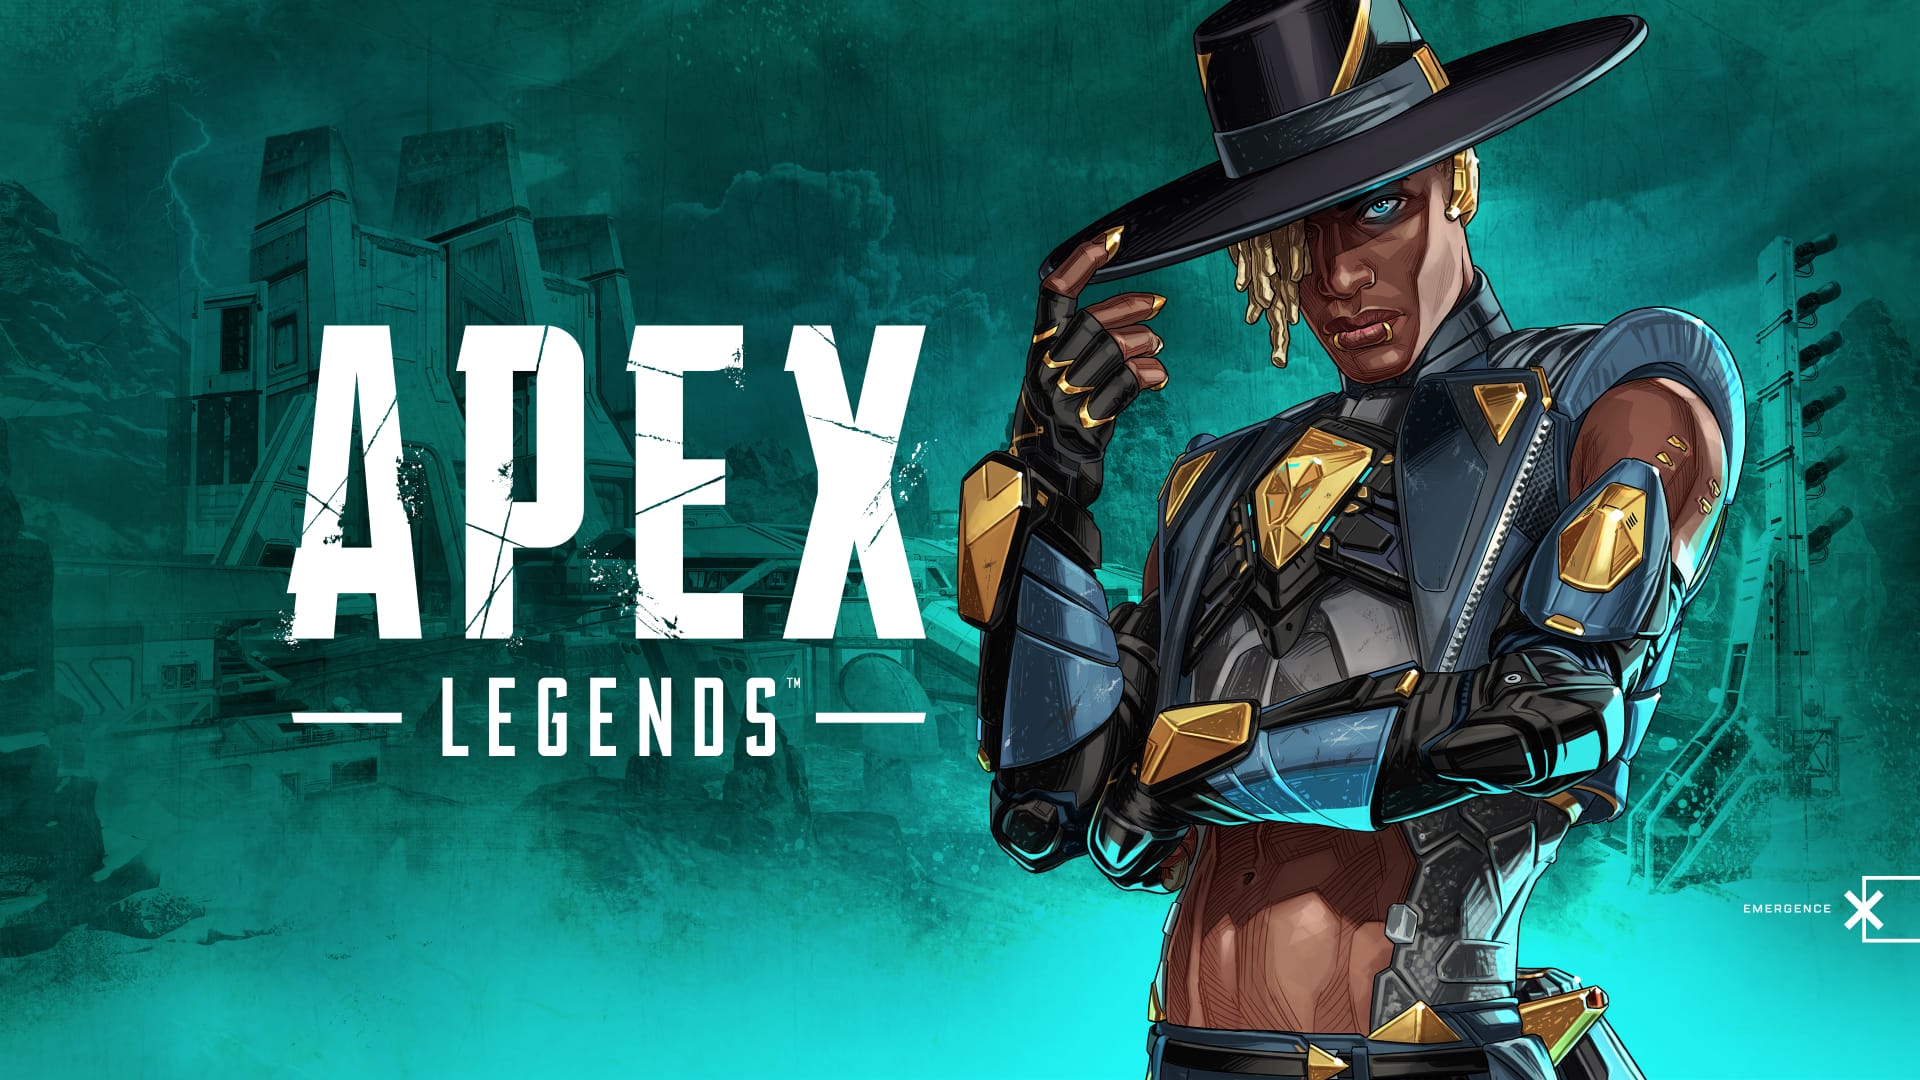 Apex Legends Emergence Teases New Season and a New Legend